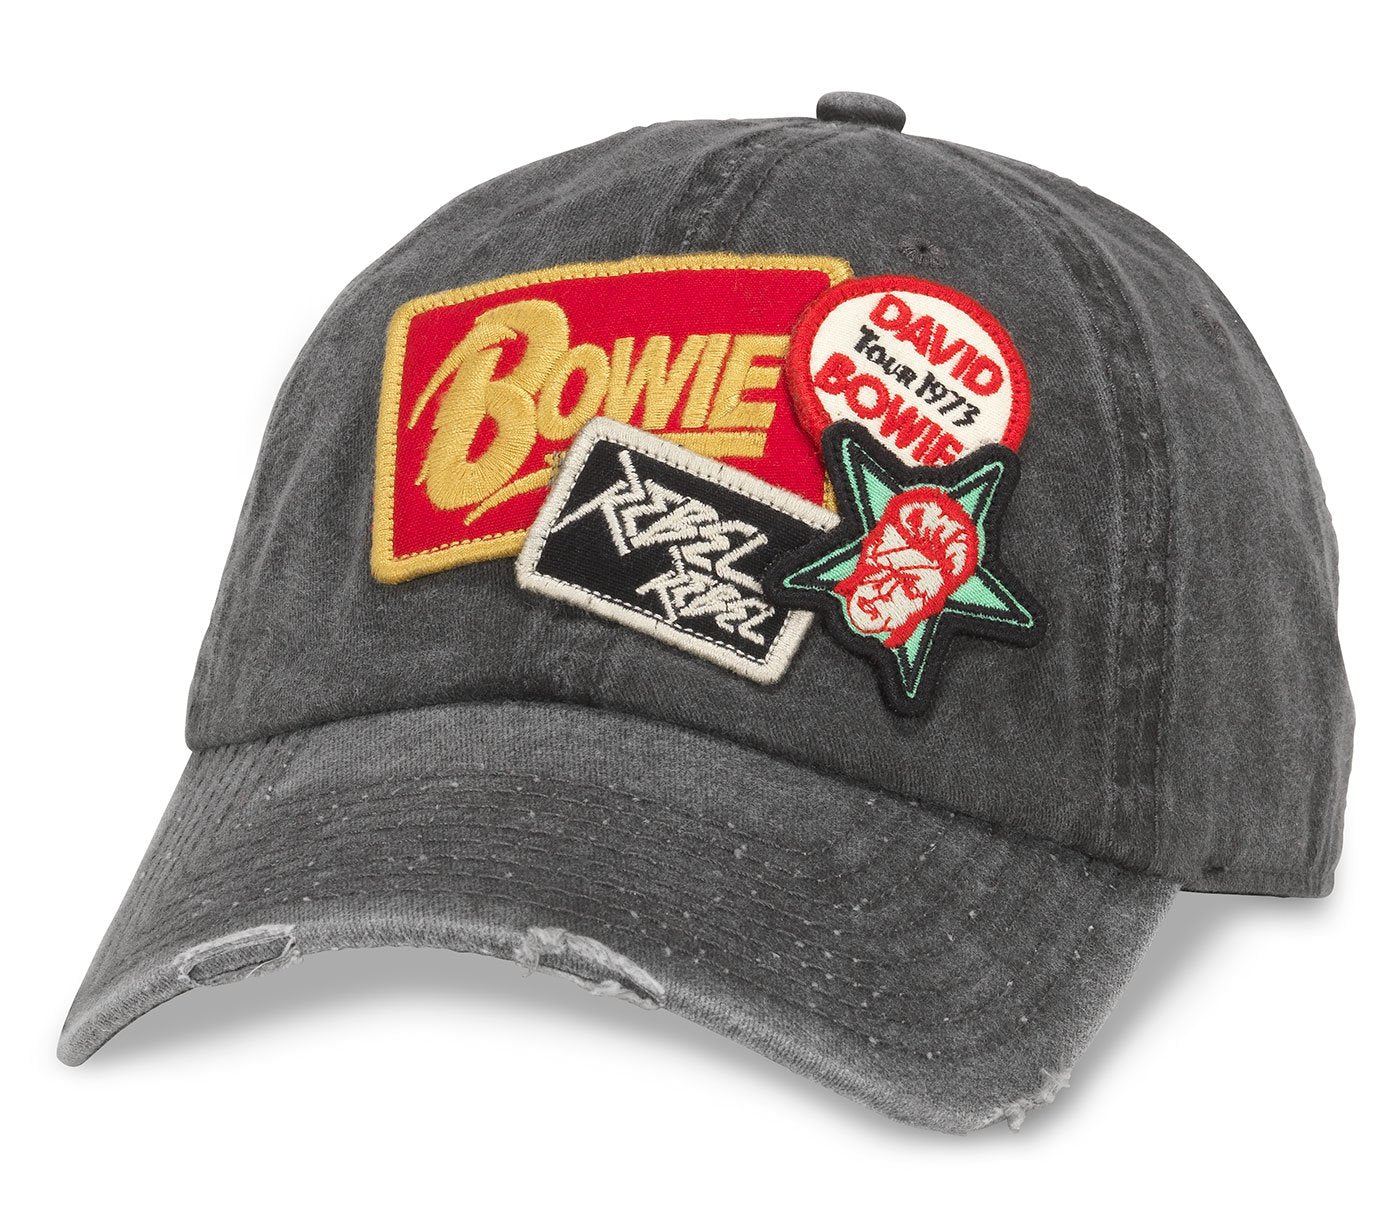 American Needle Bowie Iconic NS Cap Black 43910A-BOWI.